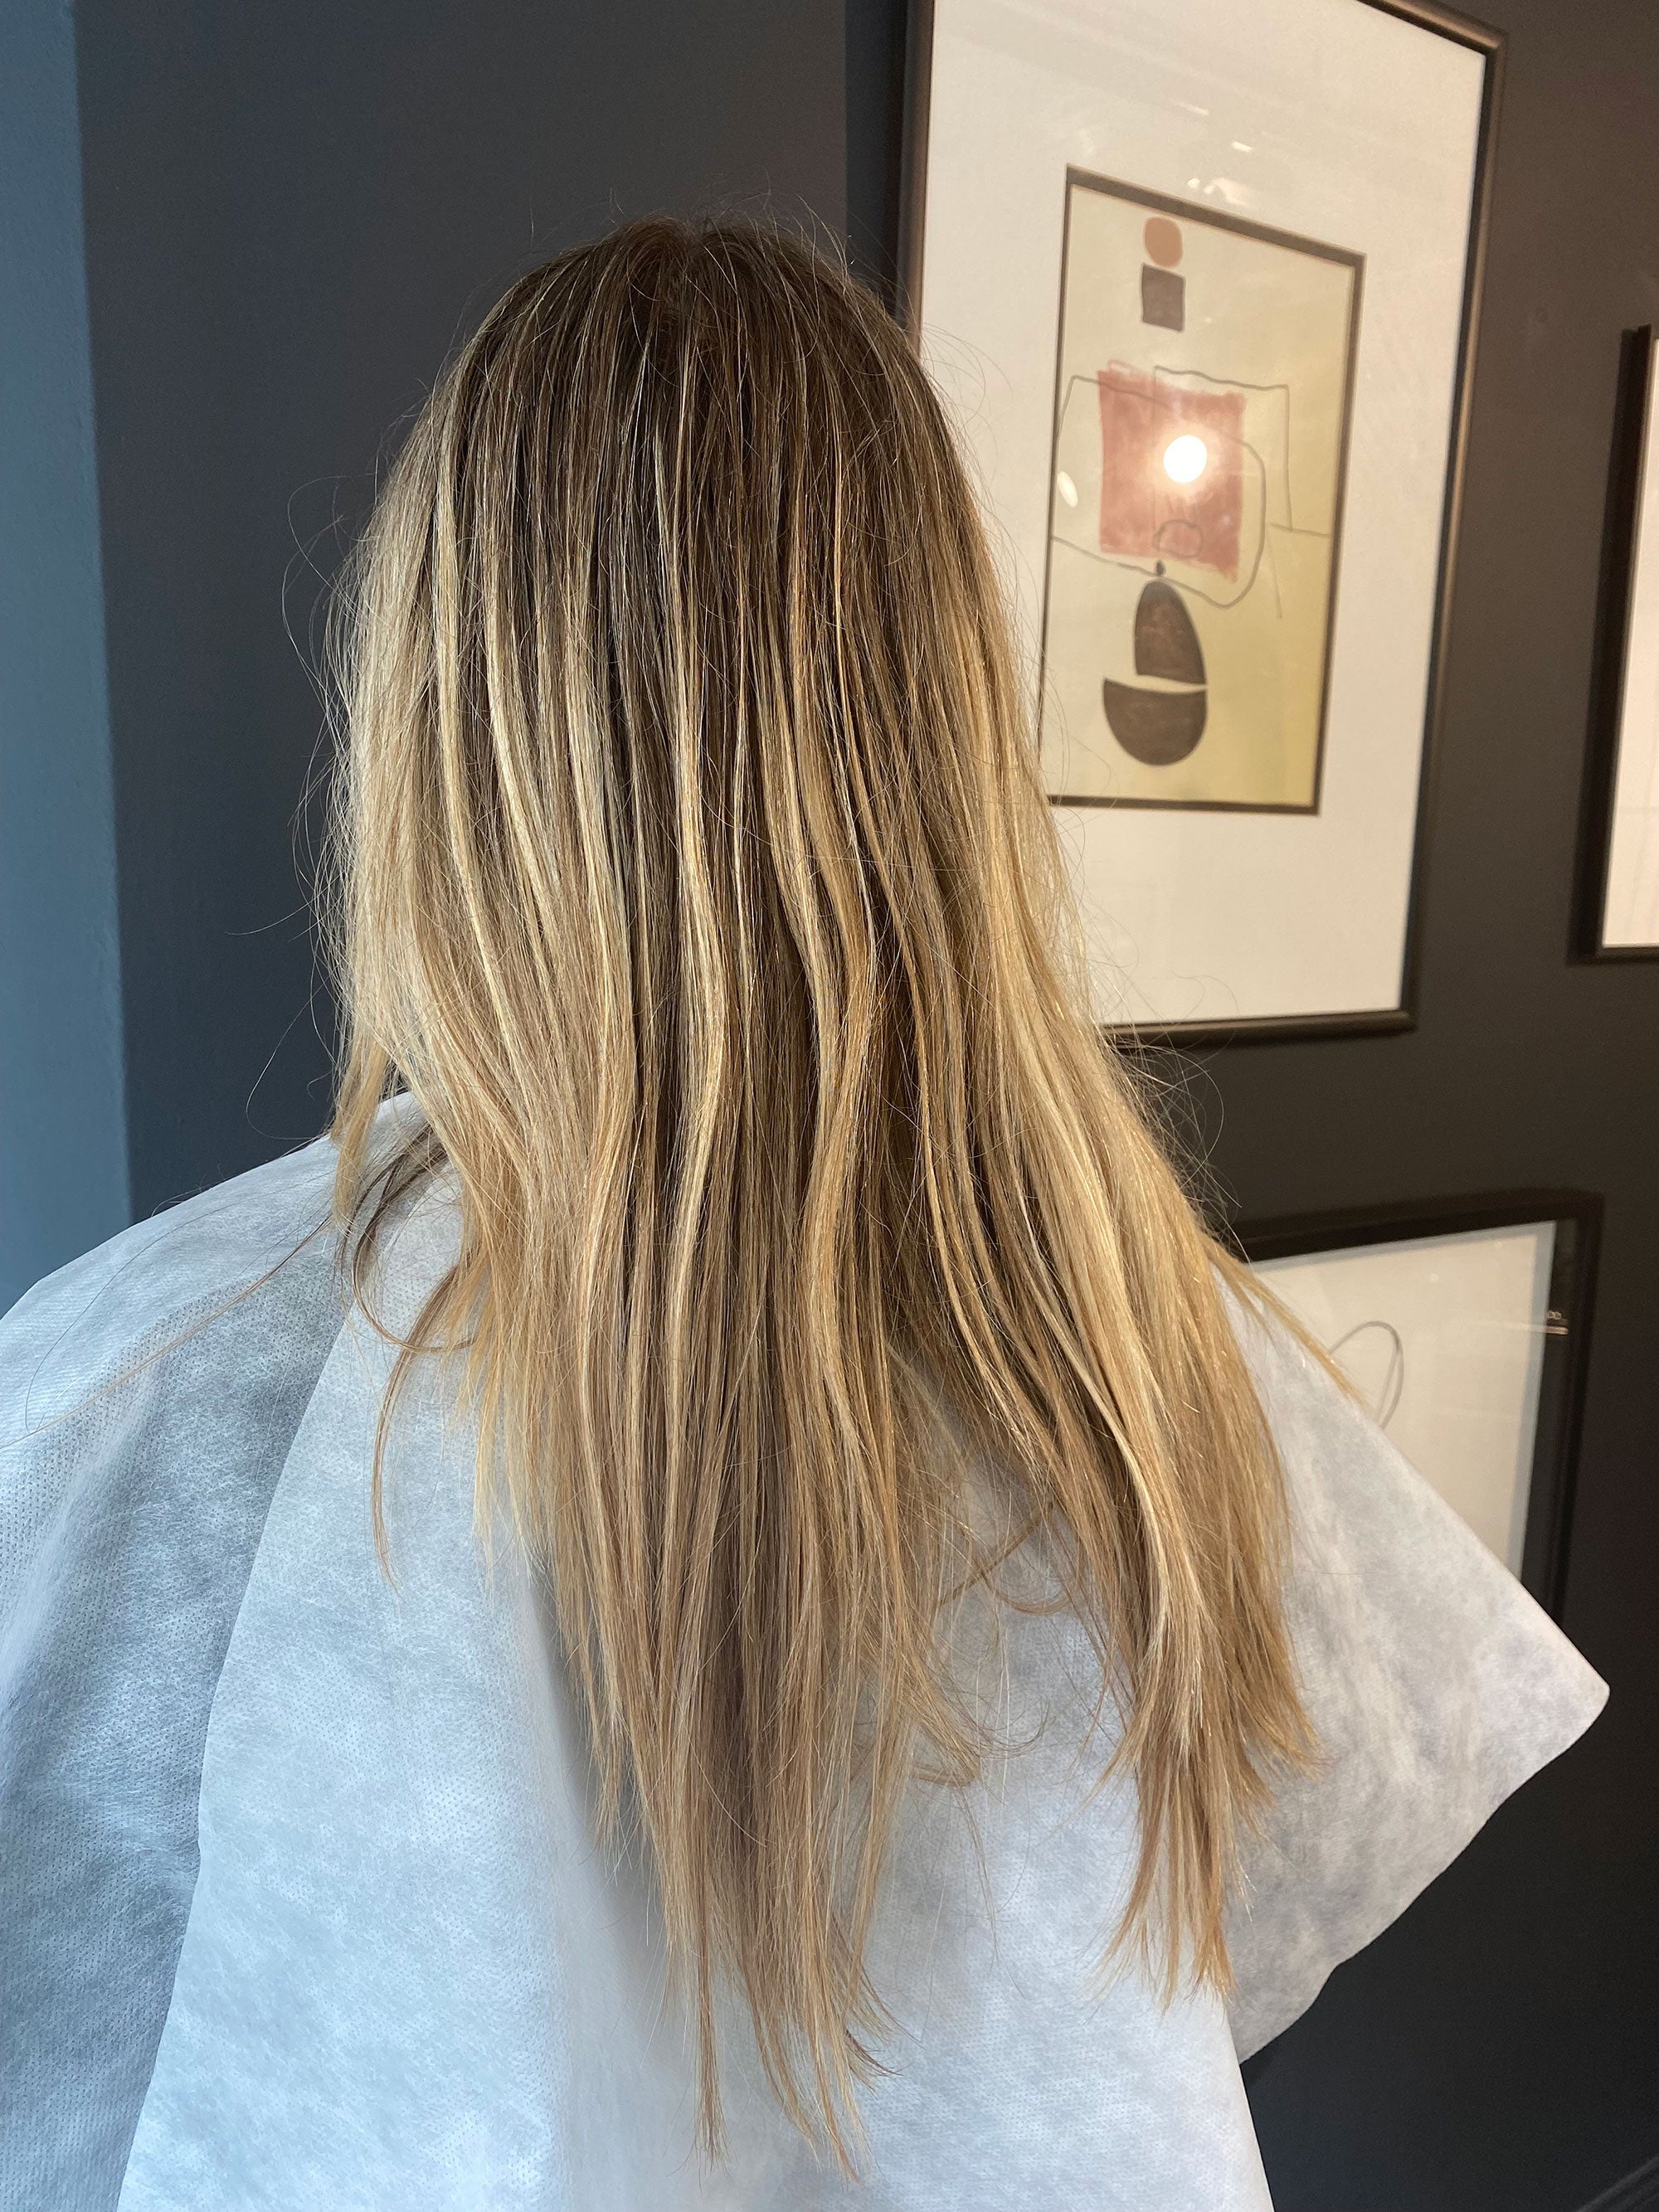 70s Blonde Hair Waves Transformation Before & After